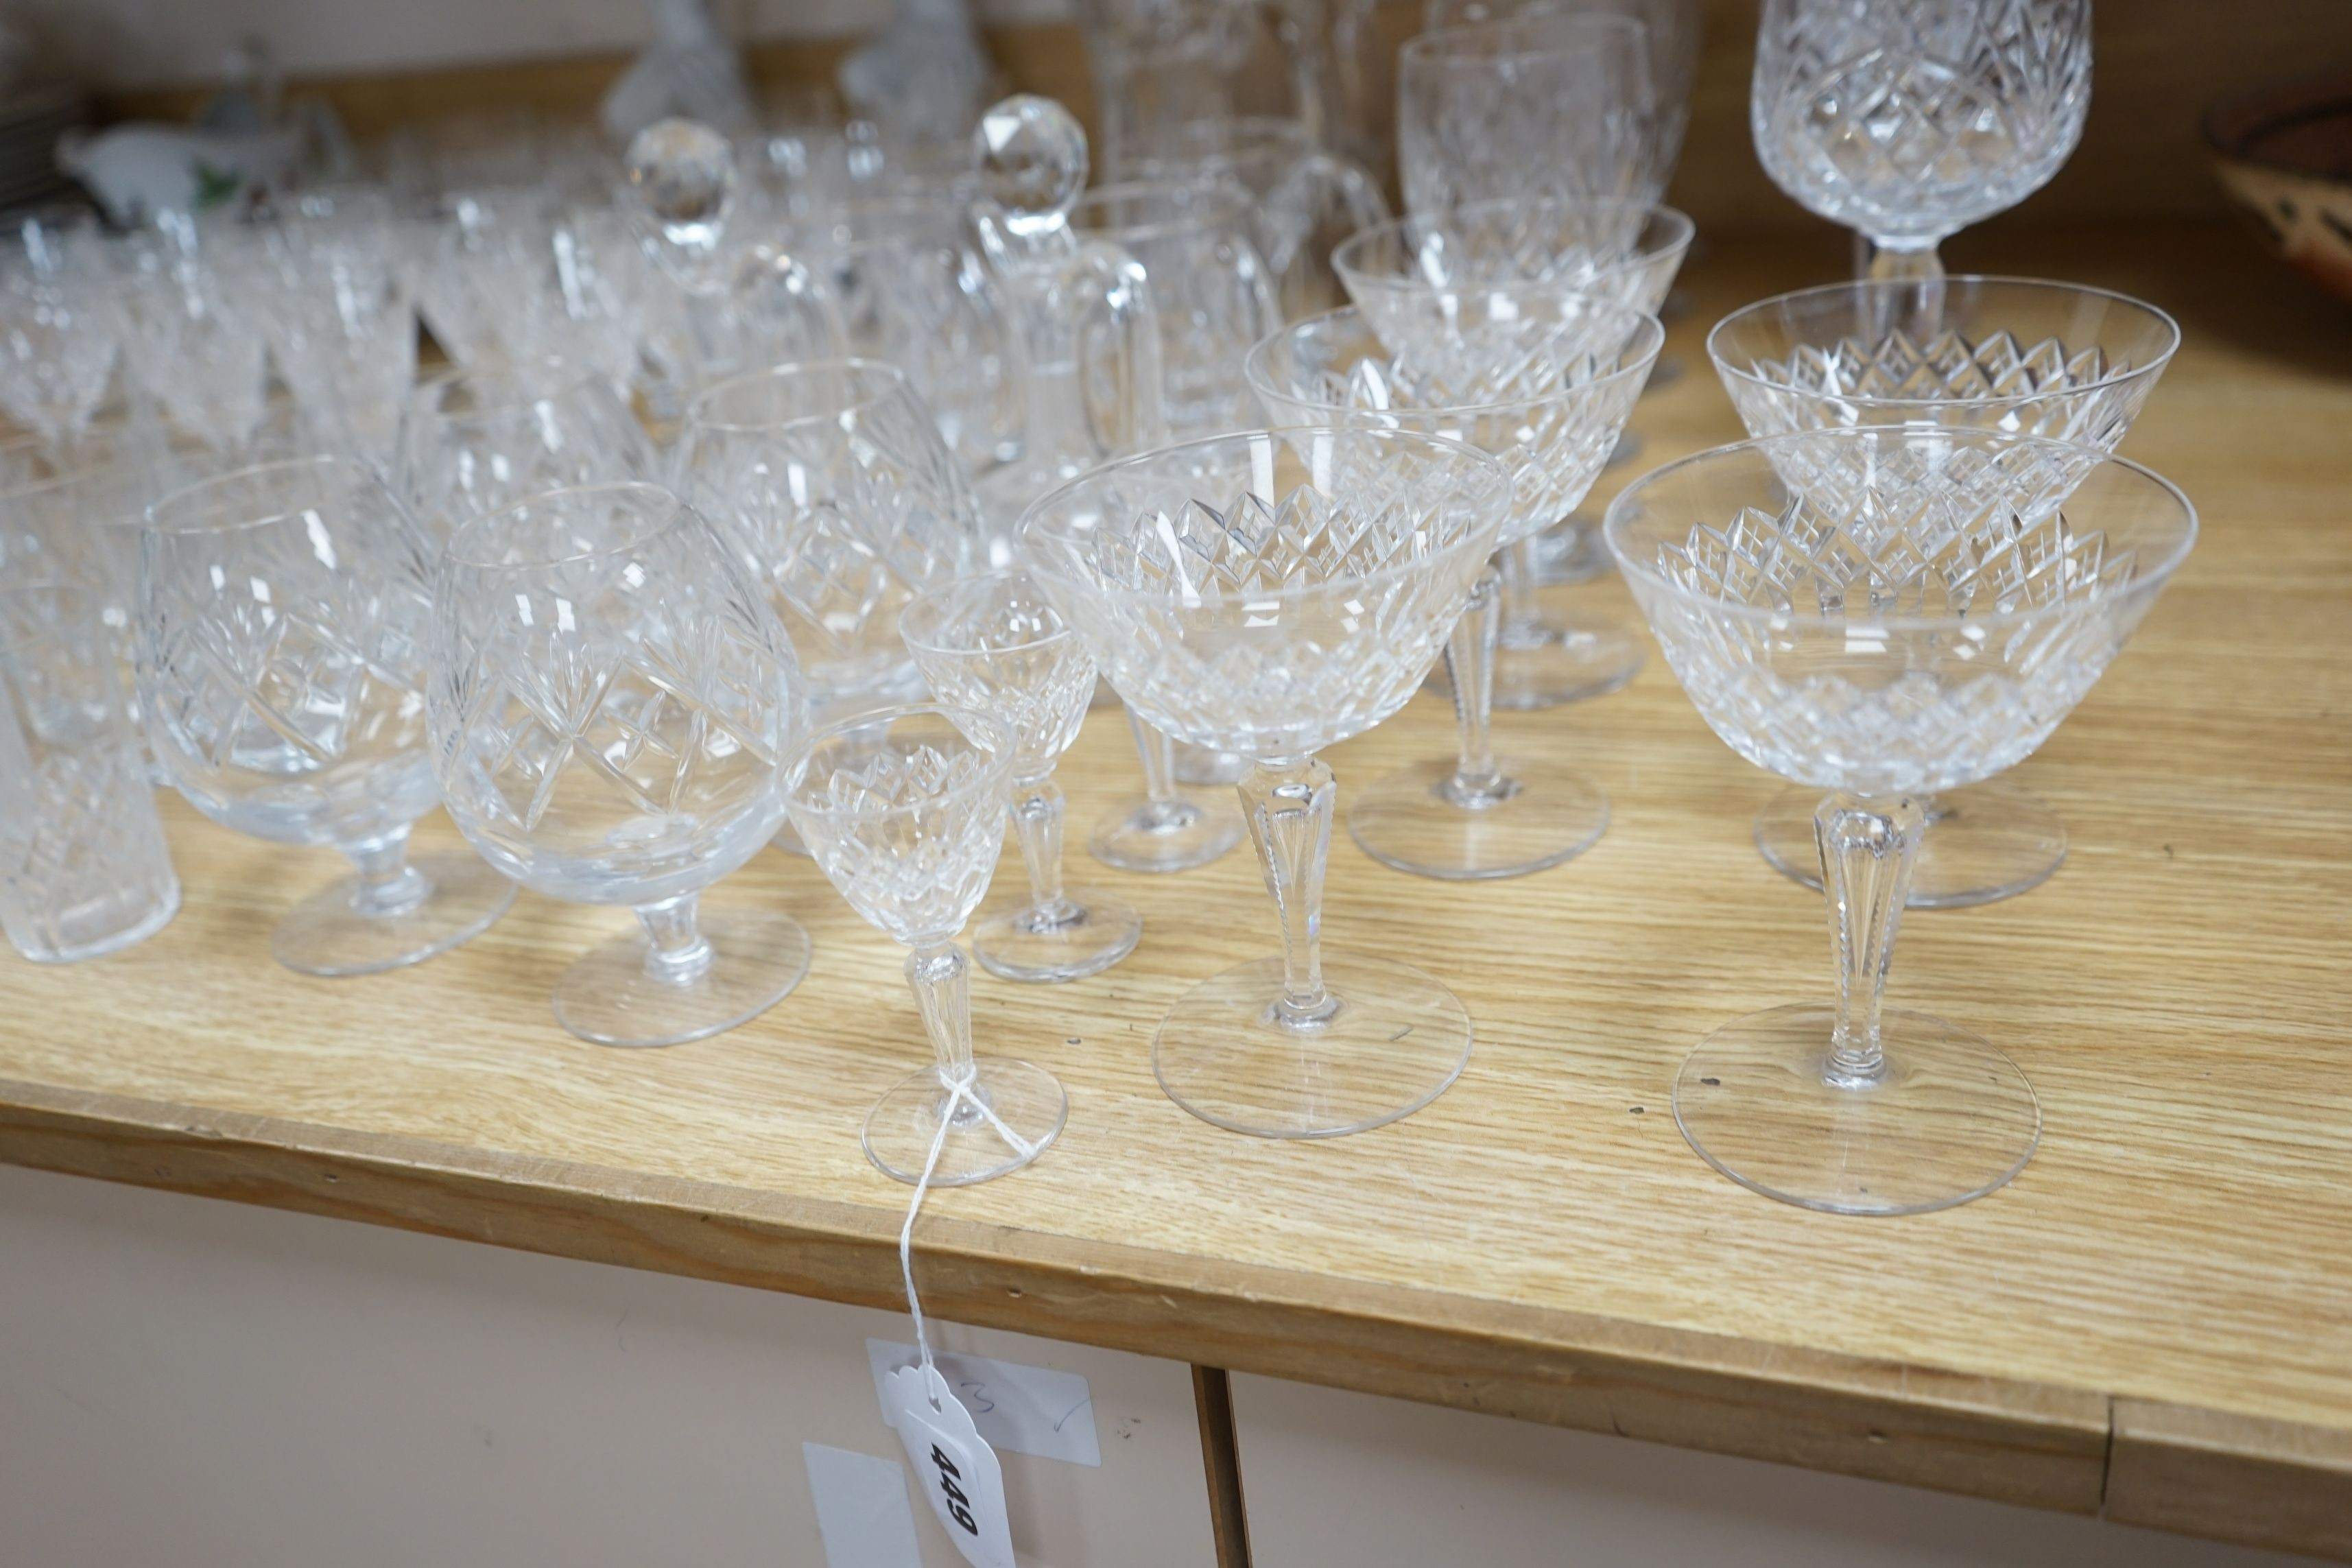 A suite of cut drinking glassware and a pair of porcelain figural lamp stems